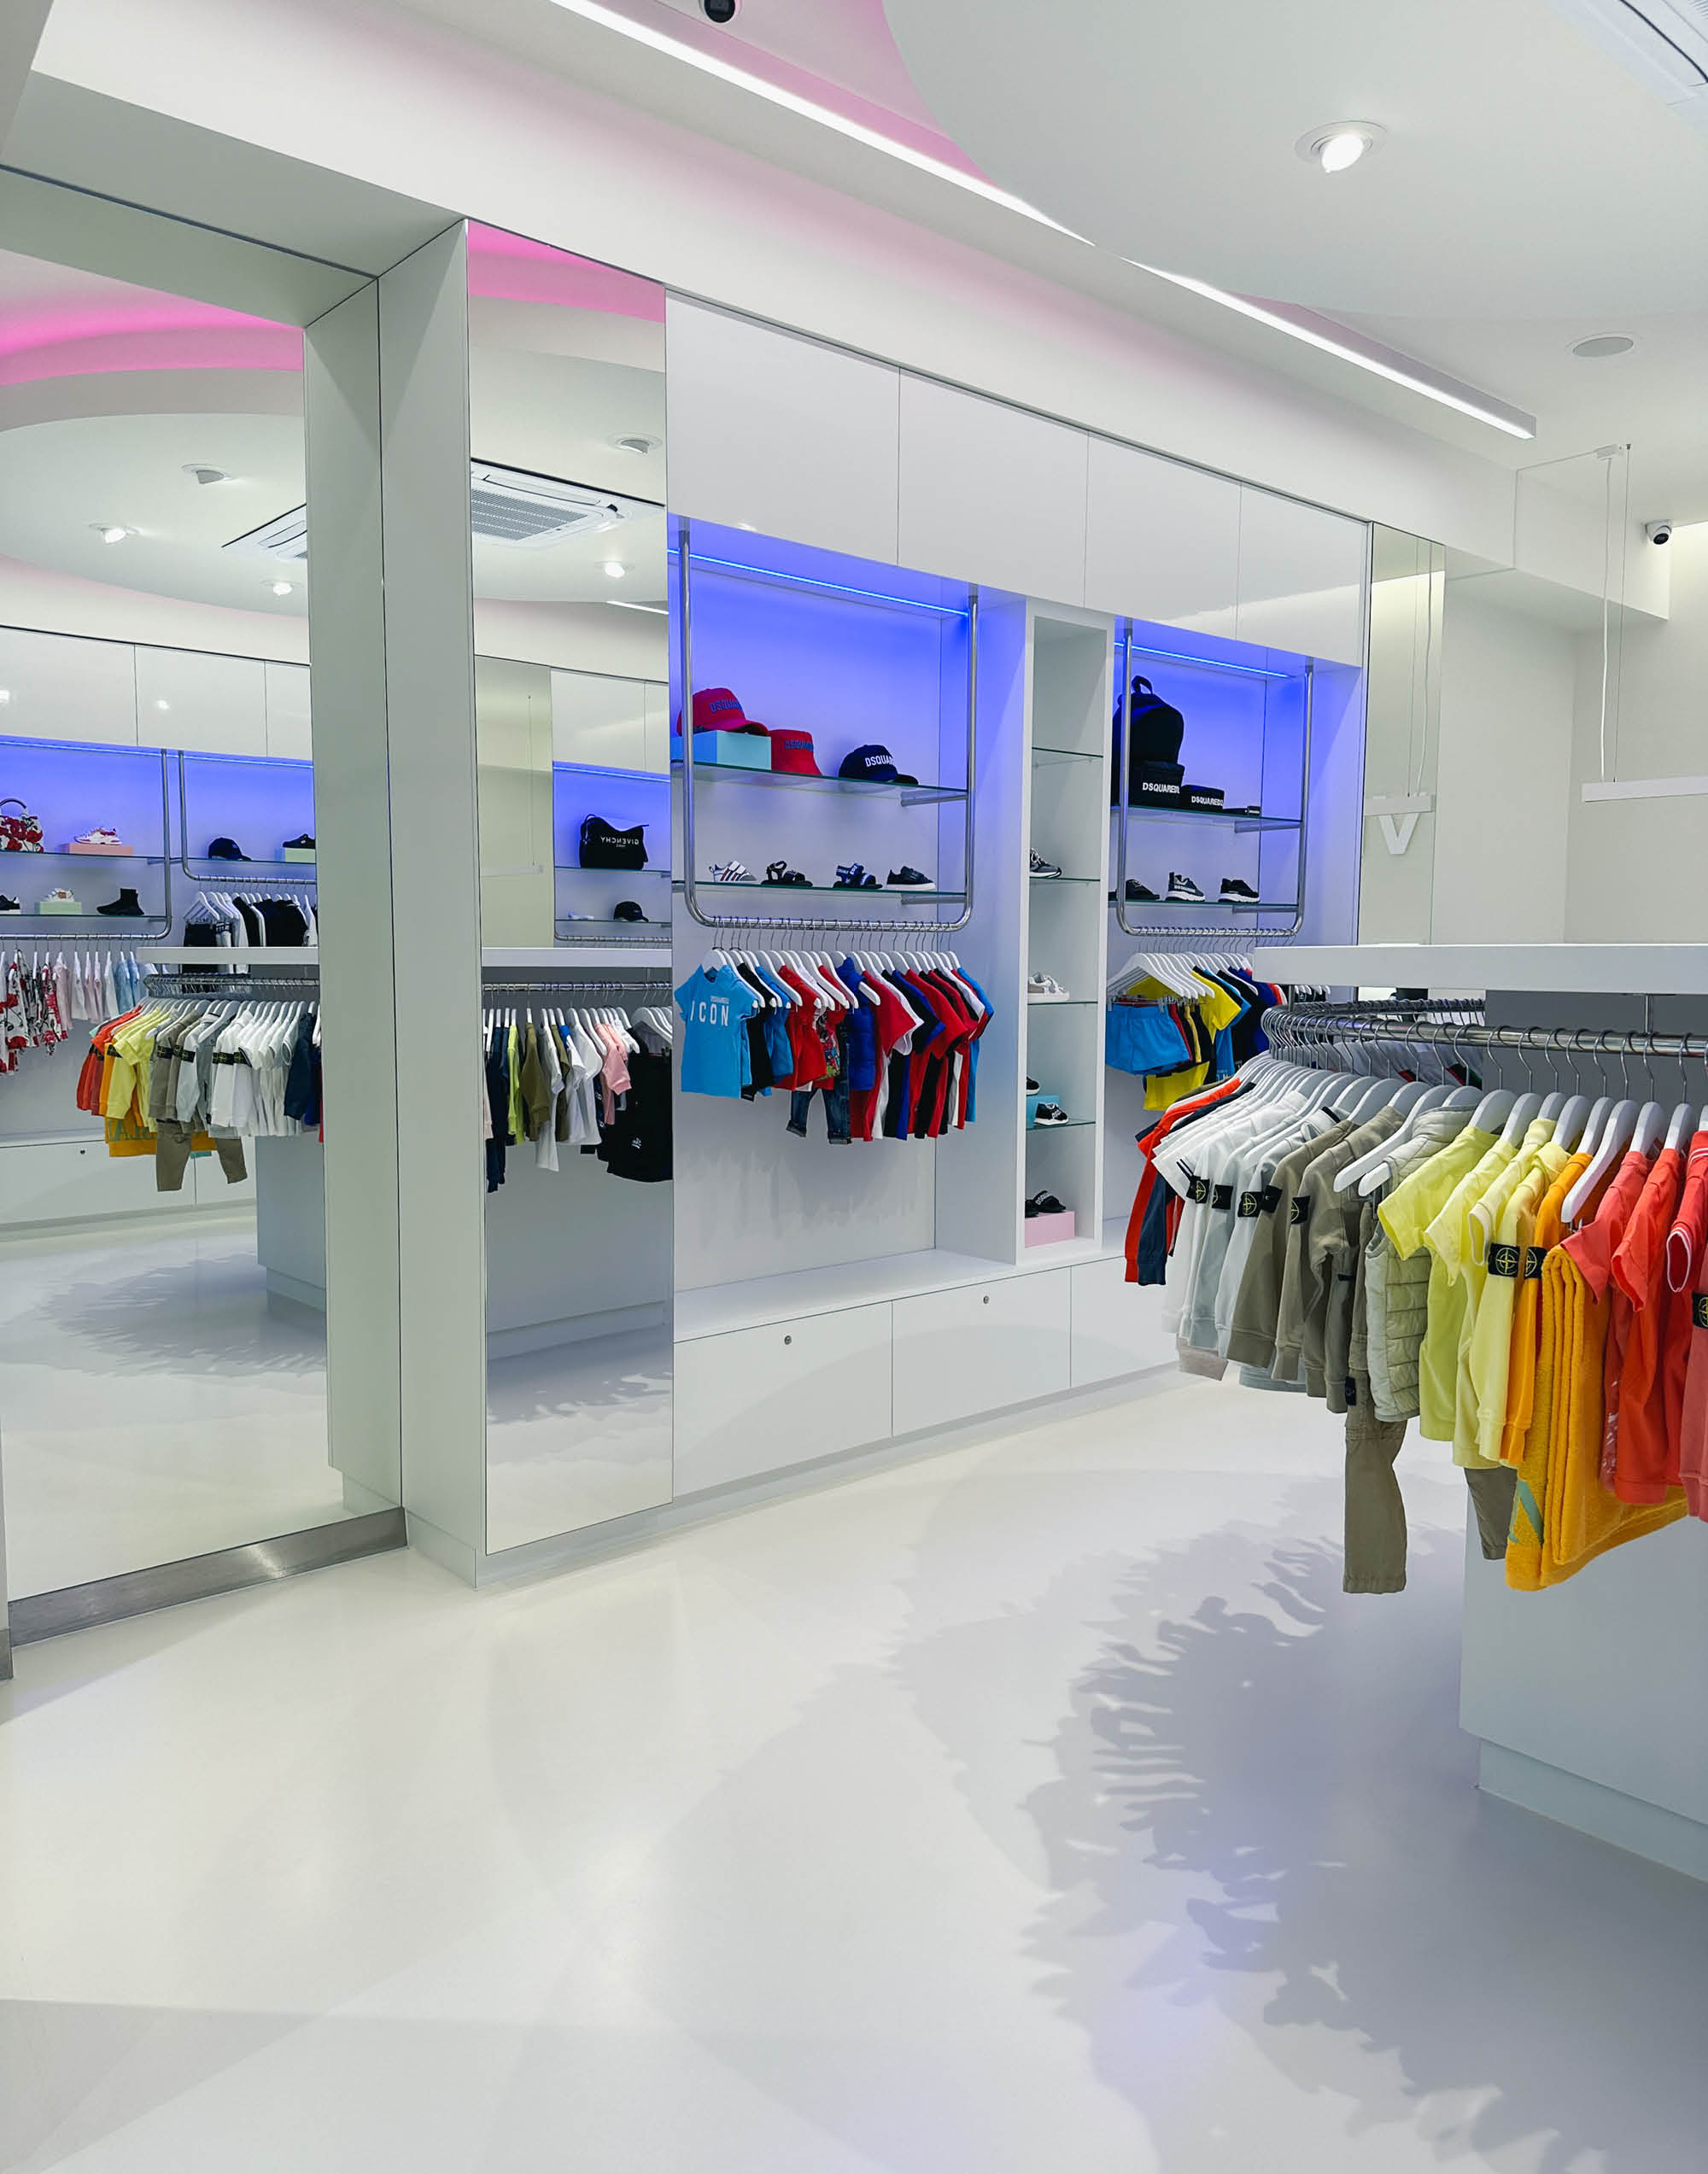 VIP Kids is a high-end fashionstore